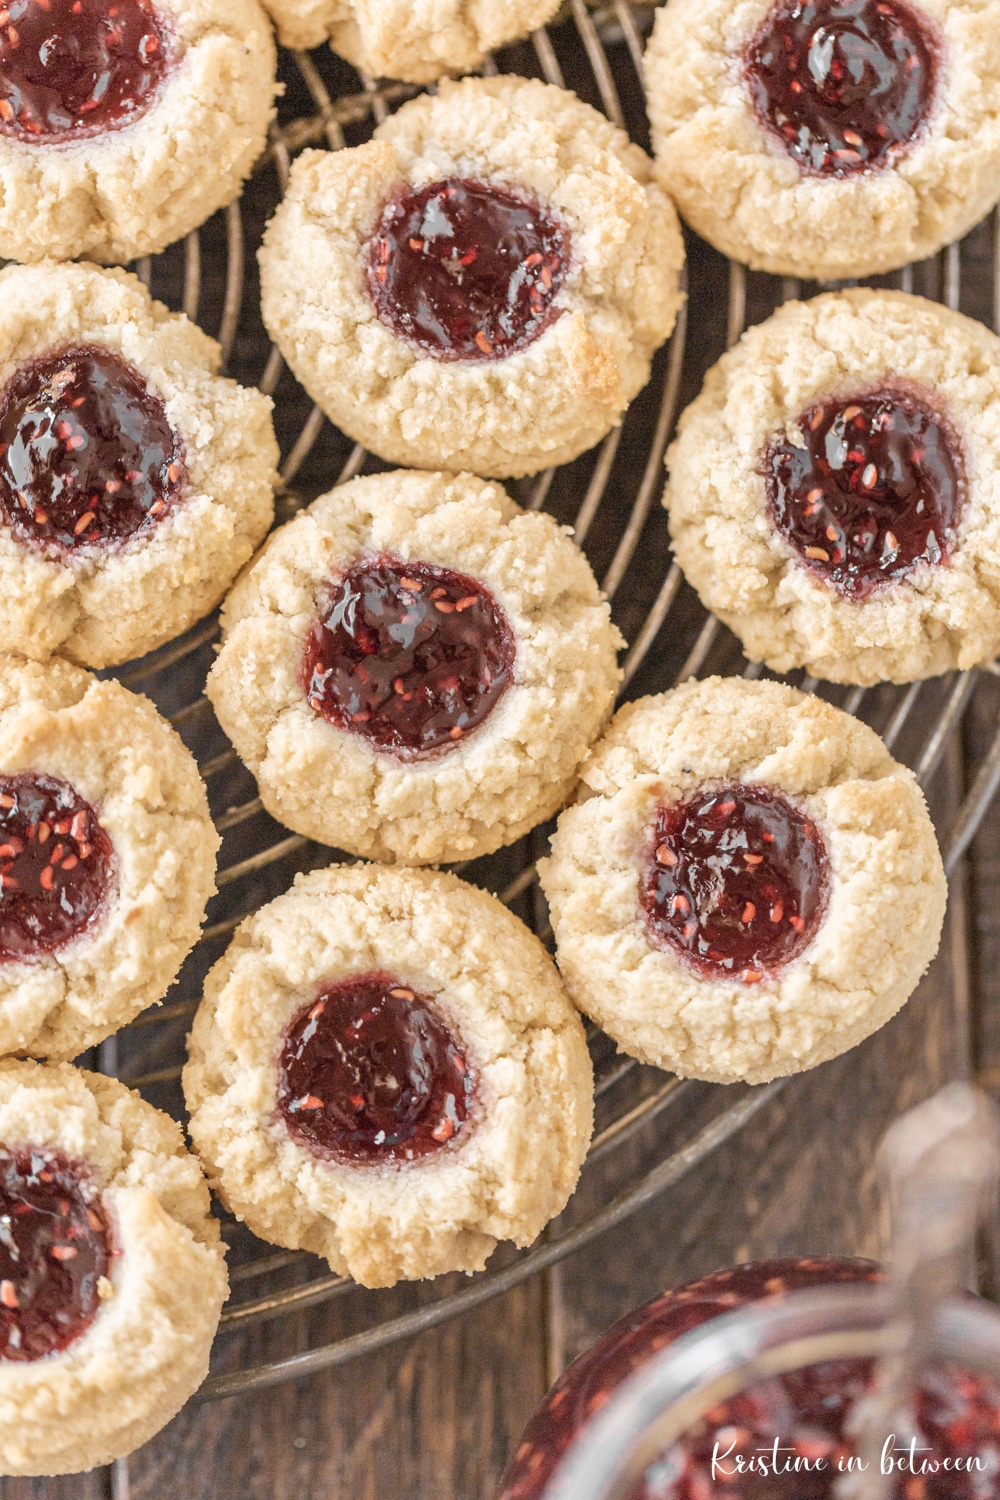 Cookies sitting on a round wire rack with a small jar of jam.